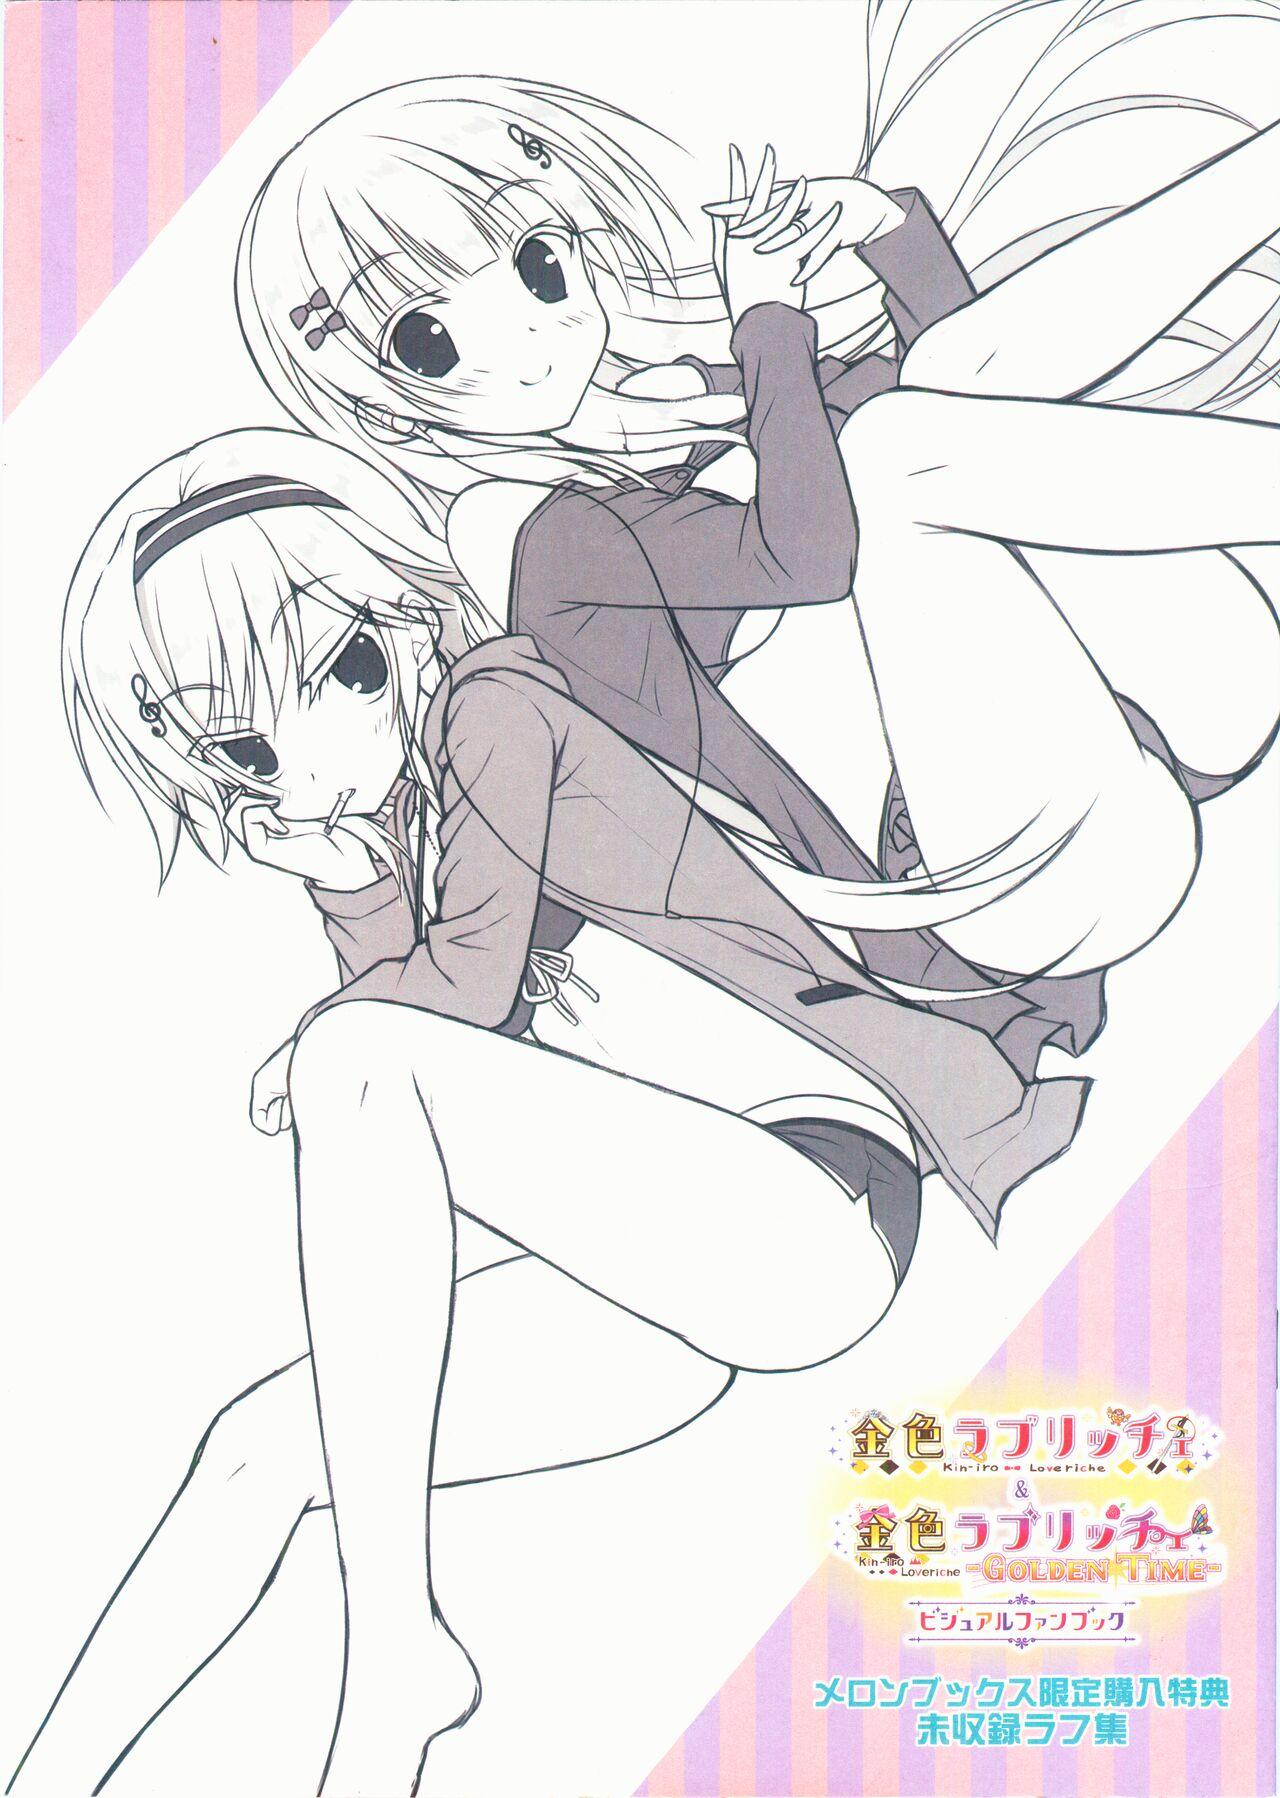 Dick Sucking [SAGA PLANETS] Kin-iro Loveriche&Kin-iro Loveriche -Golden Time- Visual Fan Book MELONBOOKS Only Bought Special Unreleased Roughs Book - Kin iro loveriche Cameltoe - Page 1